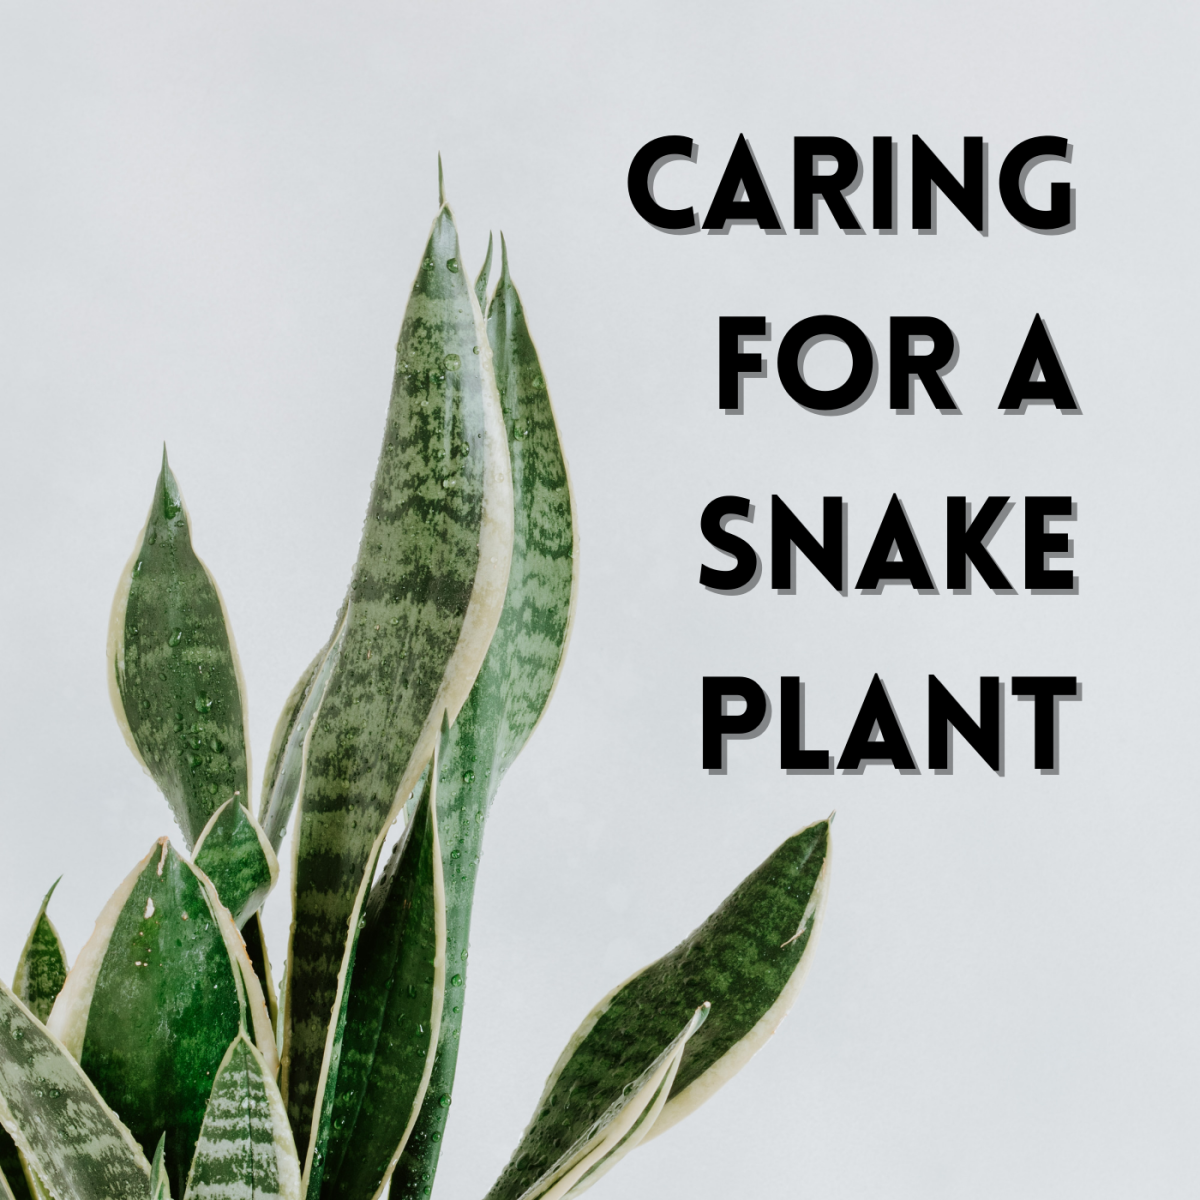 Caring for a snake plant.